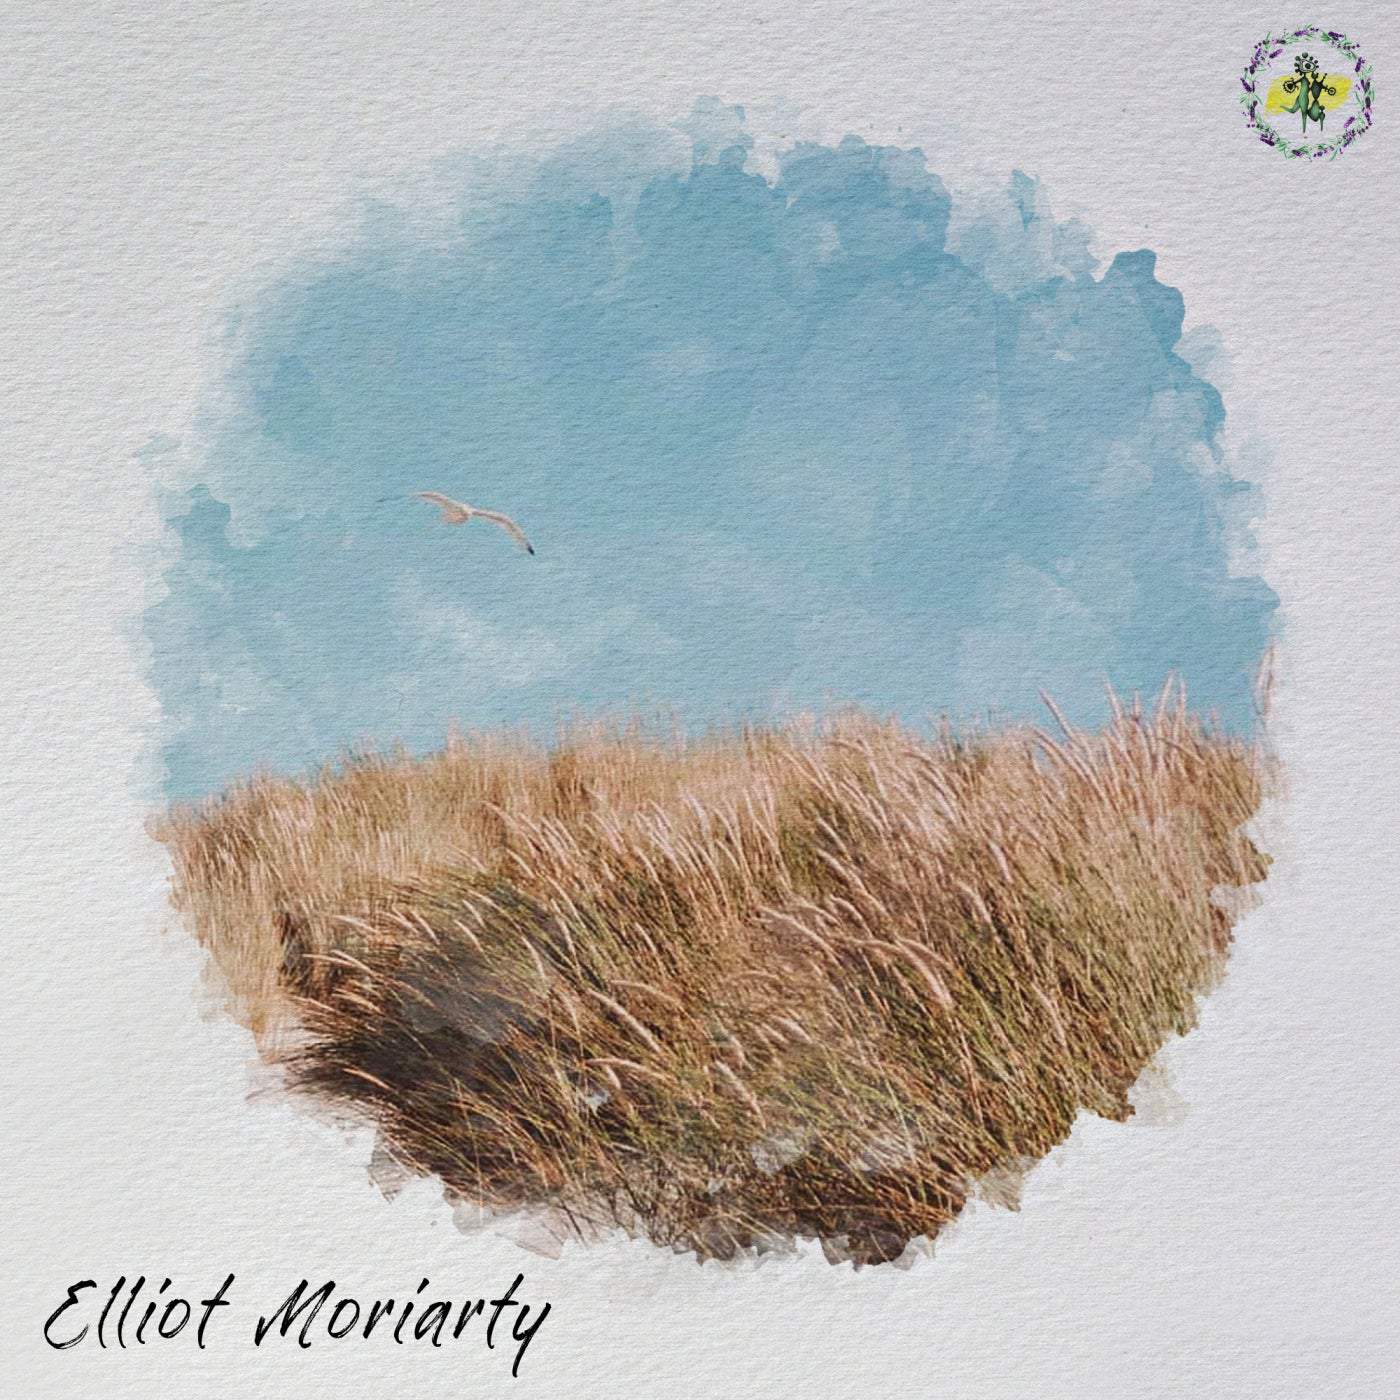 Download Elliot Moriarty - Simple Things